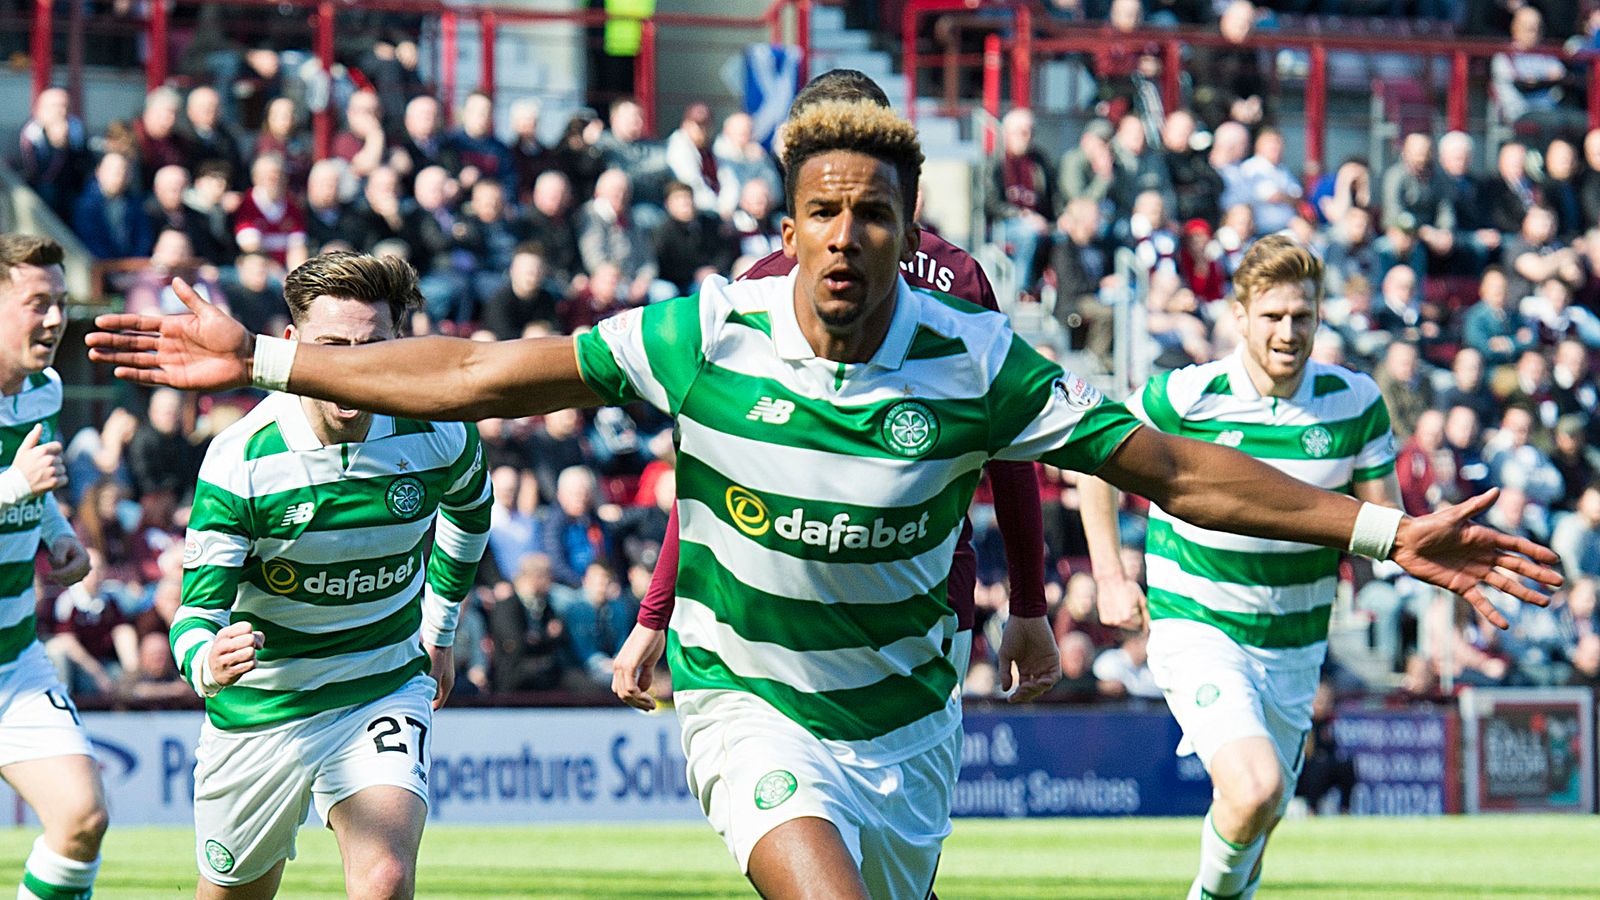 Hearts 0 - 5 Celtic - Match Report & Highlights